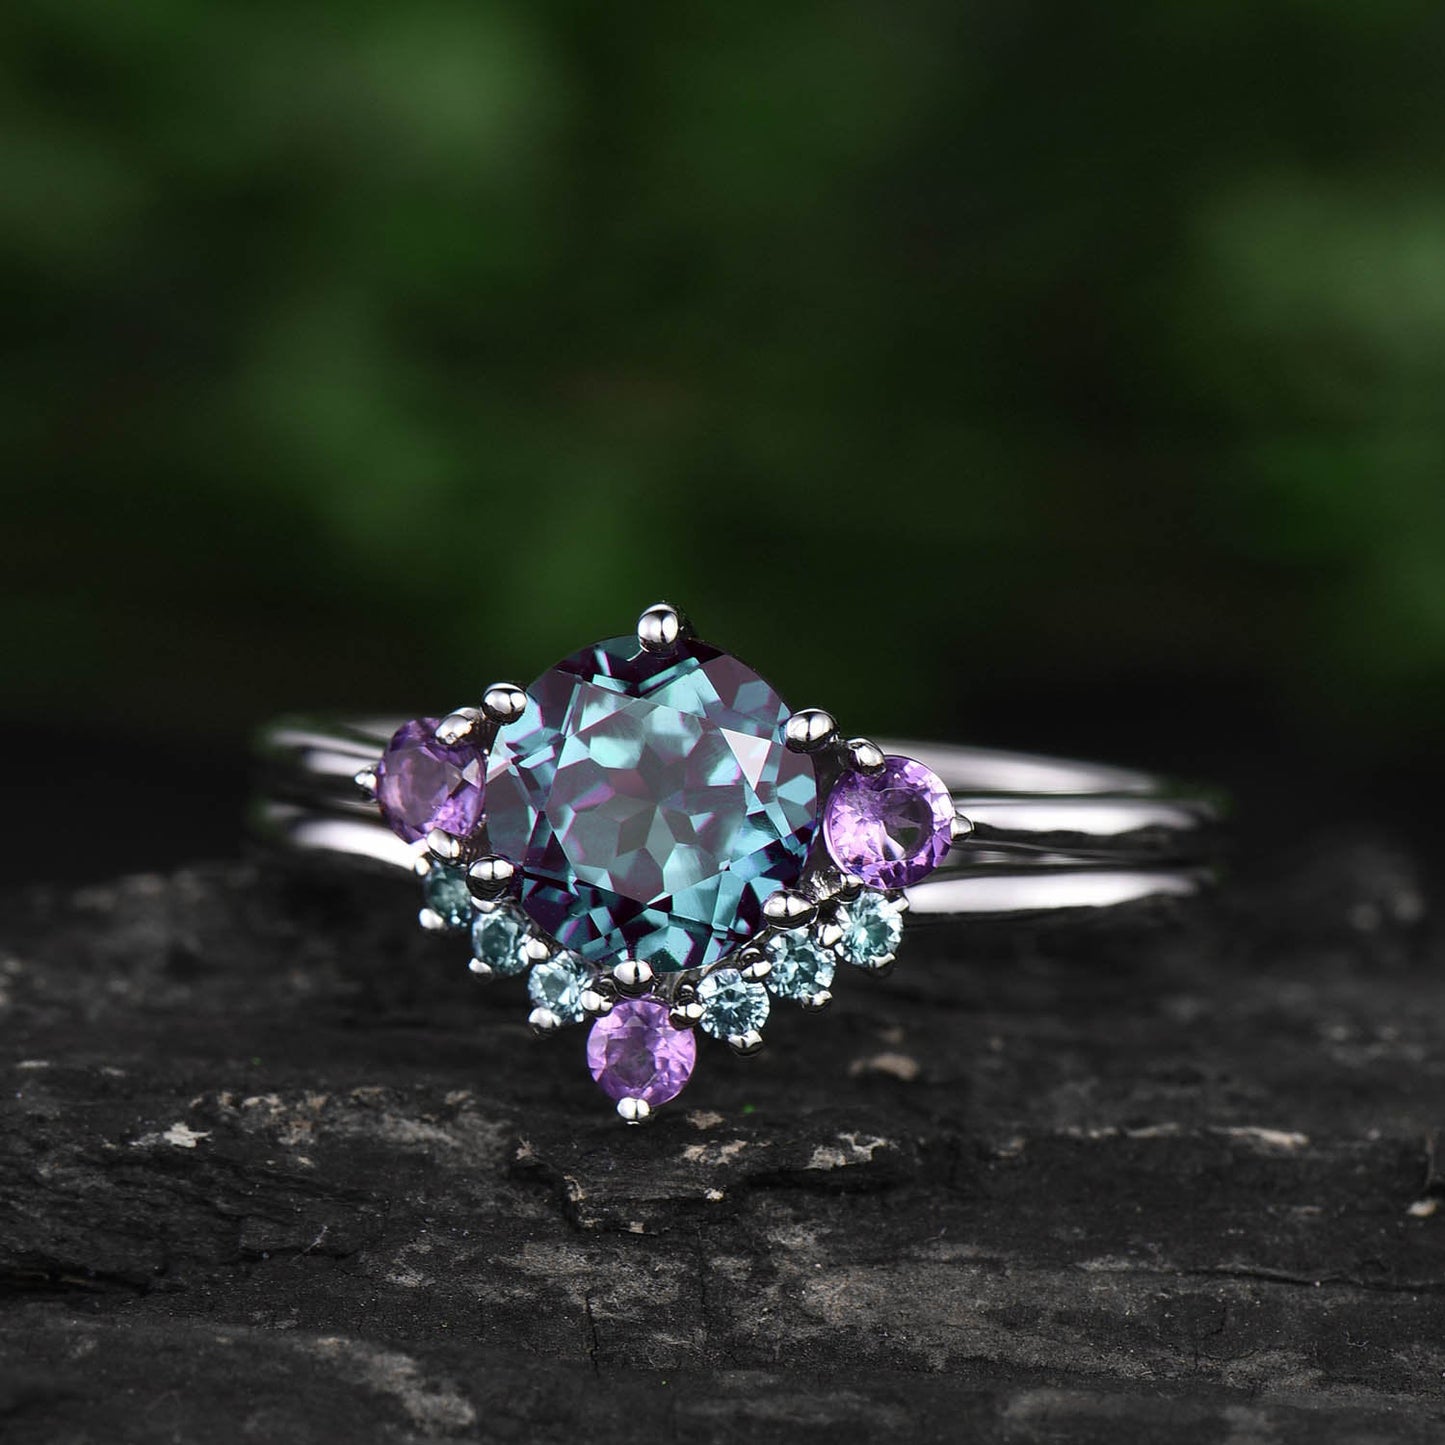 Vintage unique Three stone engagement ring color change 7mm alexandrite engagement ring set white gold amethyst ring June birthstone ring